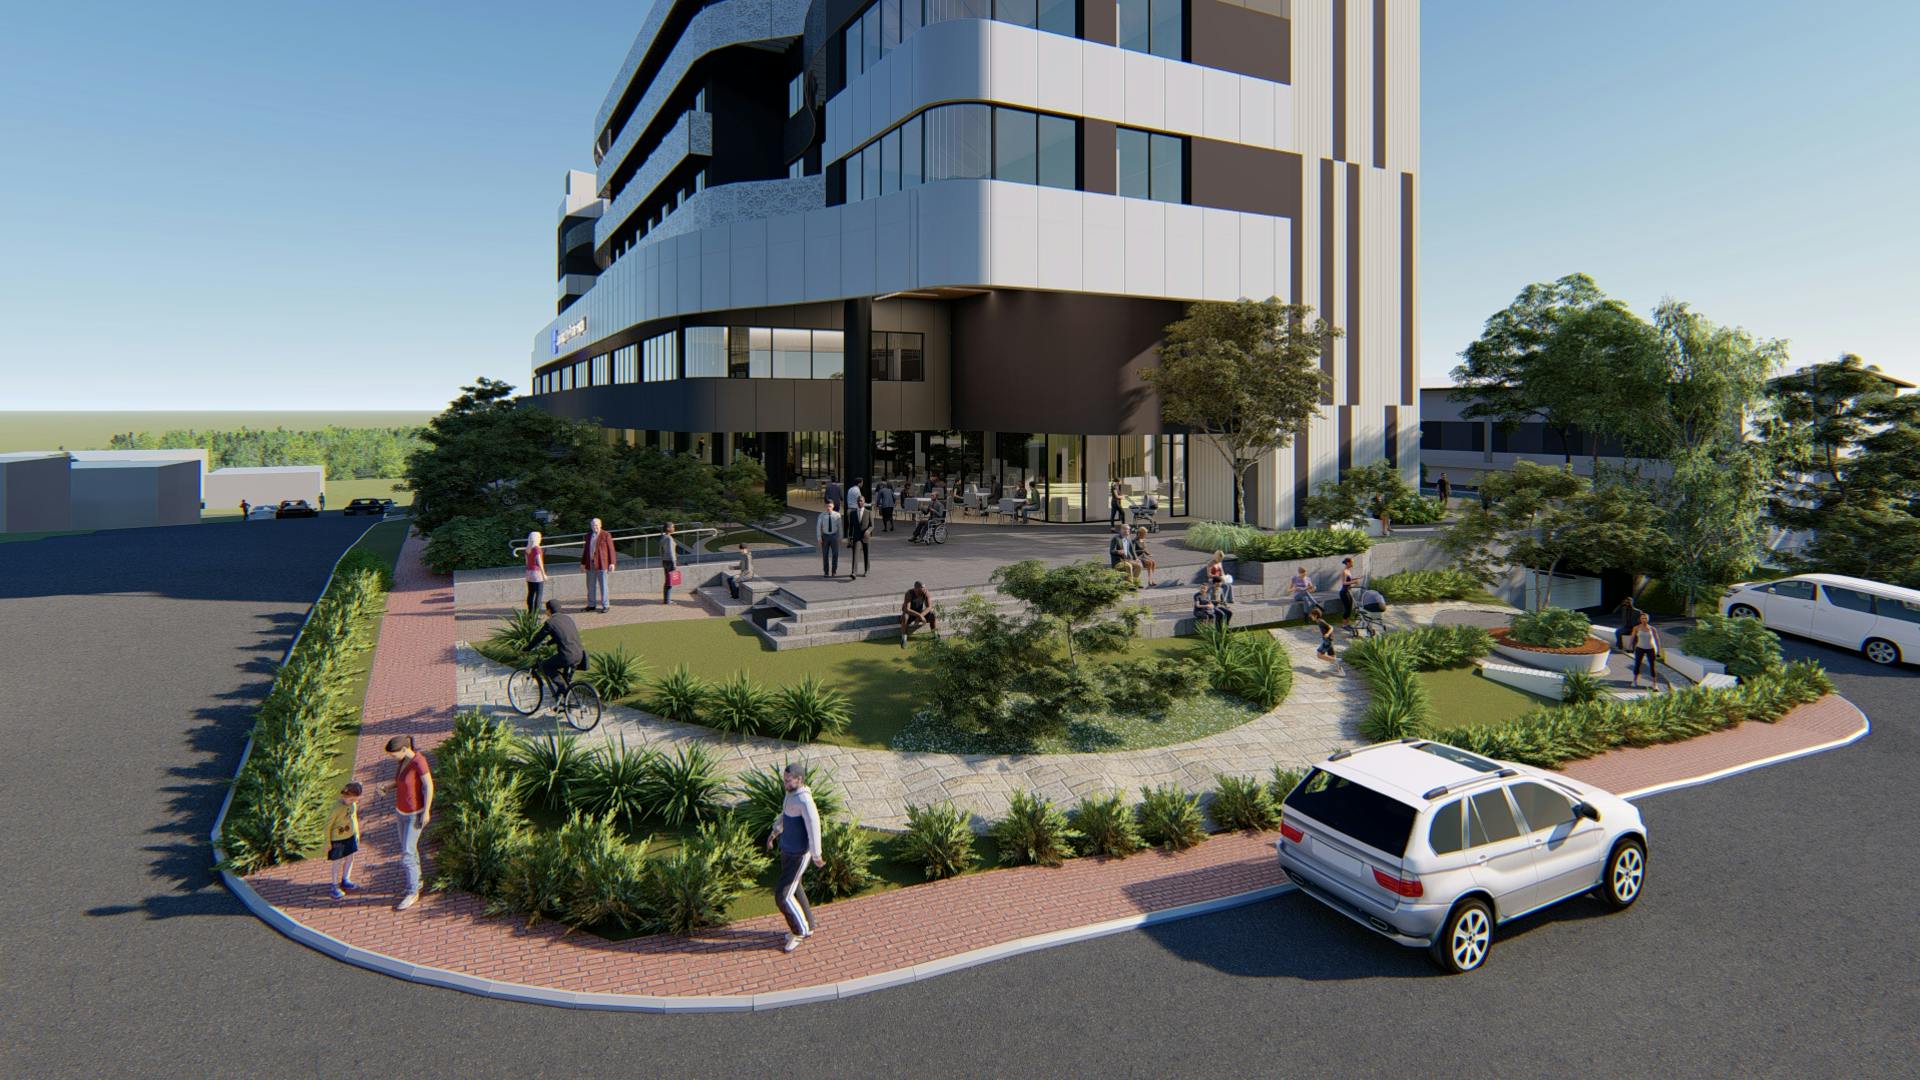 Artist impression of the public space area outside the new hospital building at the north of the site.jpg